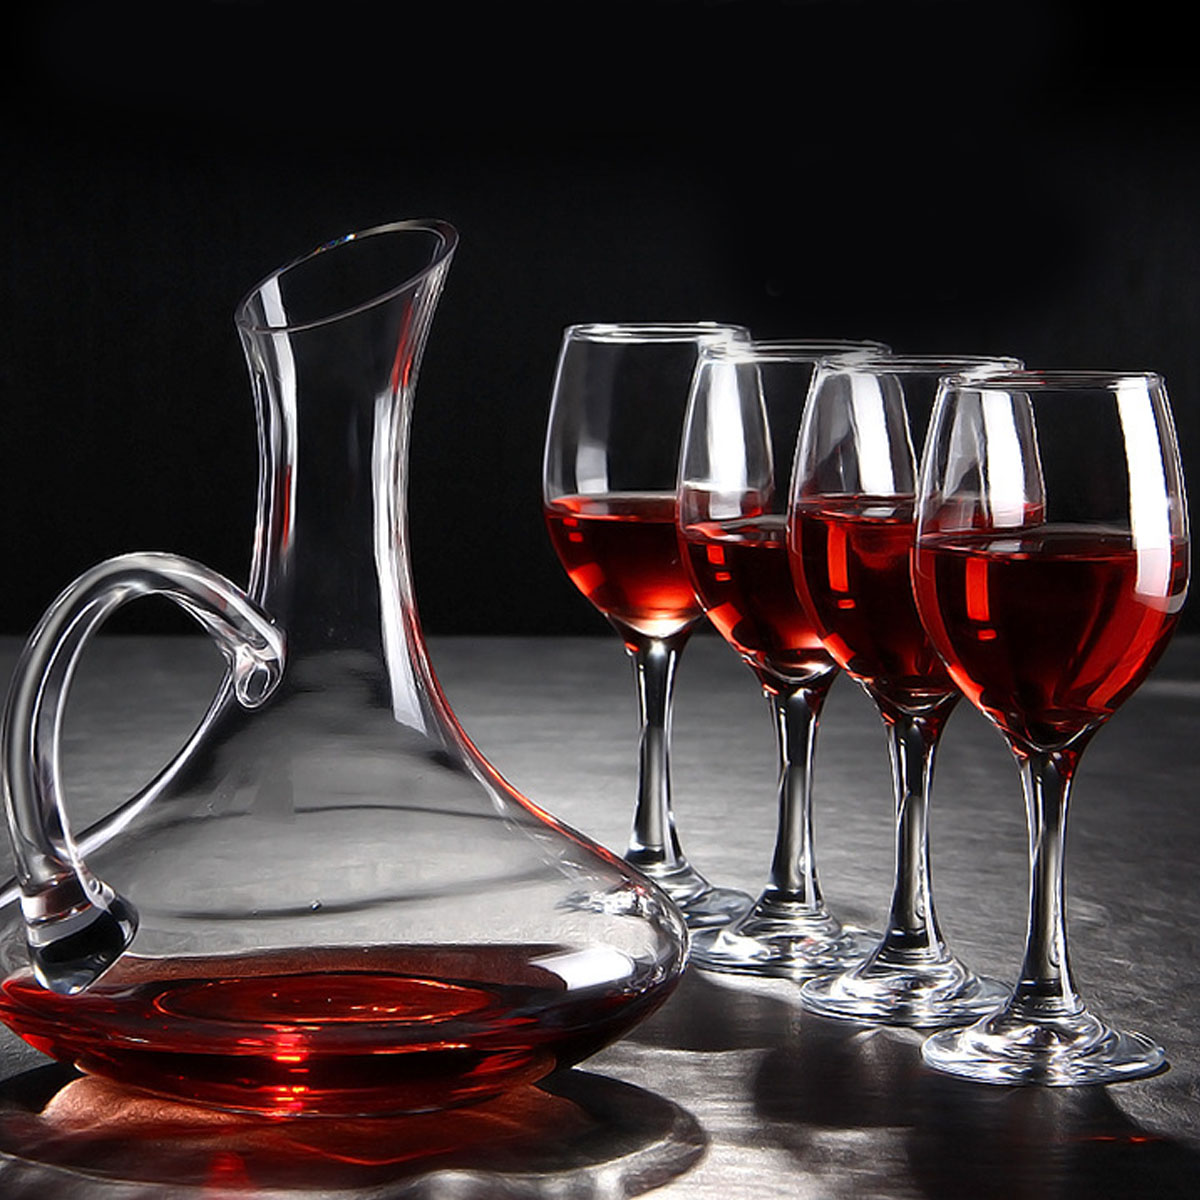 1700ML-Crystal-Glass-Decanter-and-4-Cups-Elegant-Pourer-Carafe-Lead-Free-Gift-Table-Aerator-Carafe-1418829-2